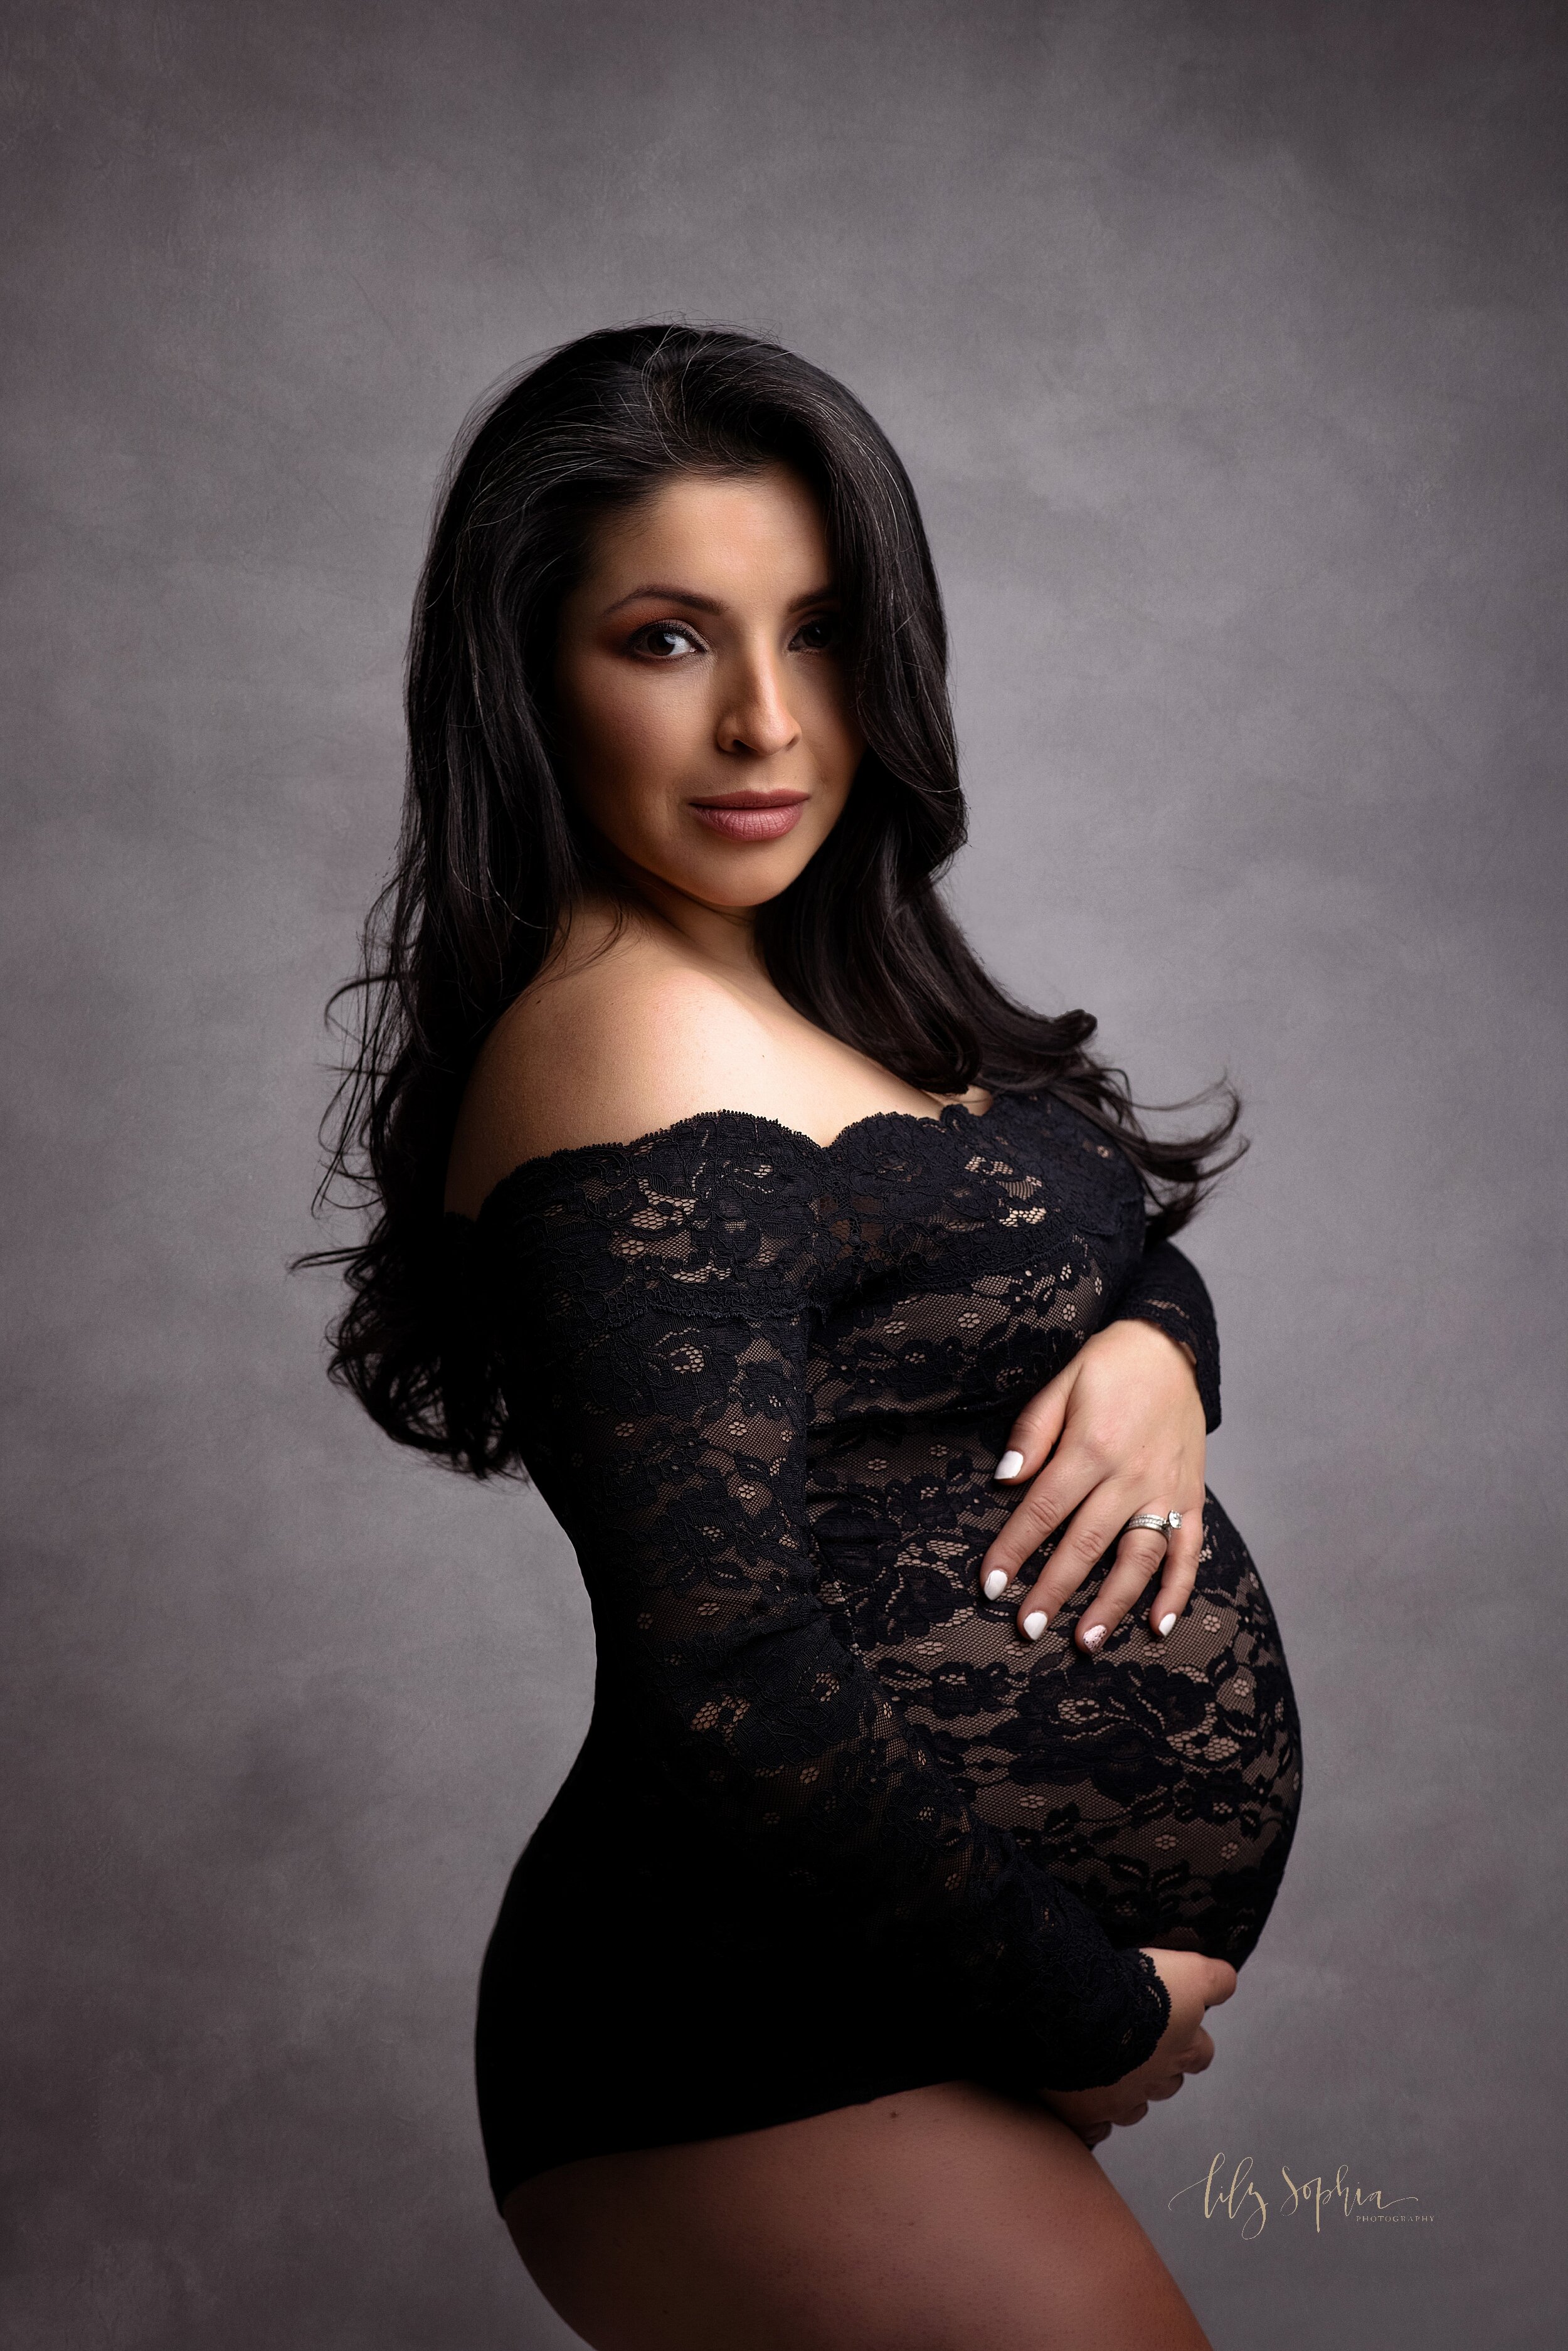  A fine art maternity portrait of a pregnant Hispanic woman with long hair wearing a black off the shoulder lace bodysuit. She is cradling her pregnant belly and gazing serenely at the camera. 